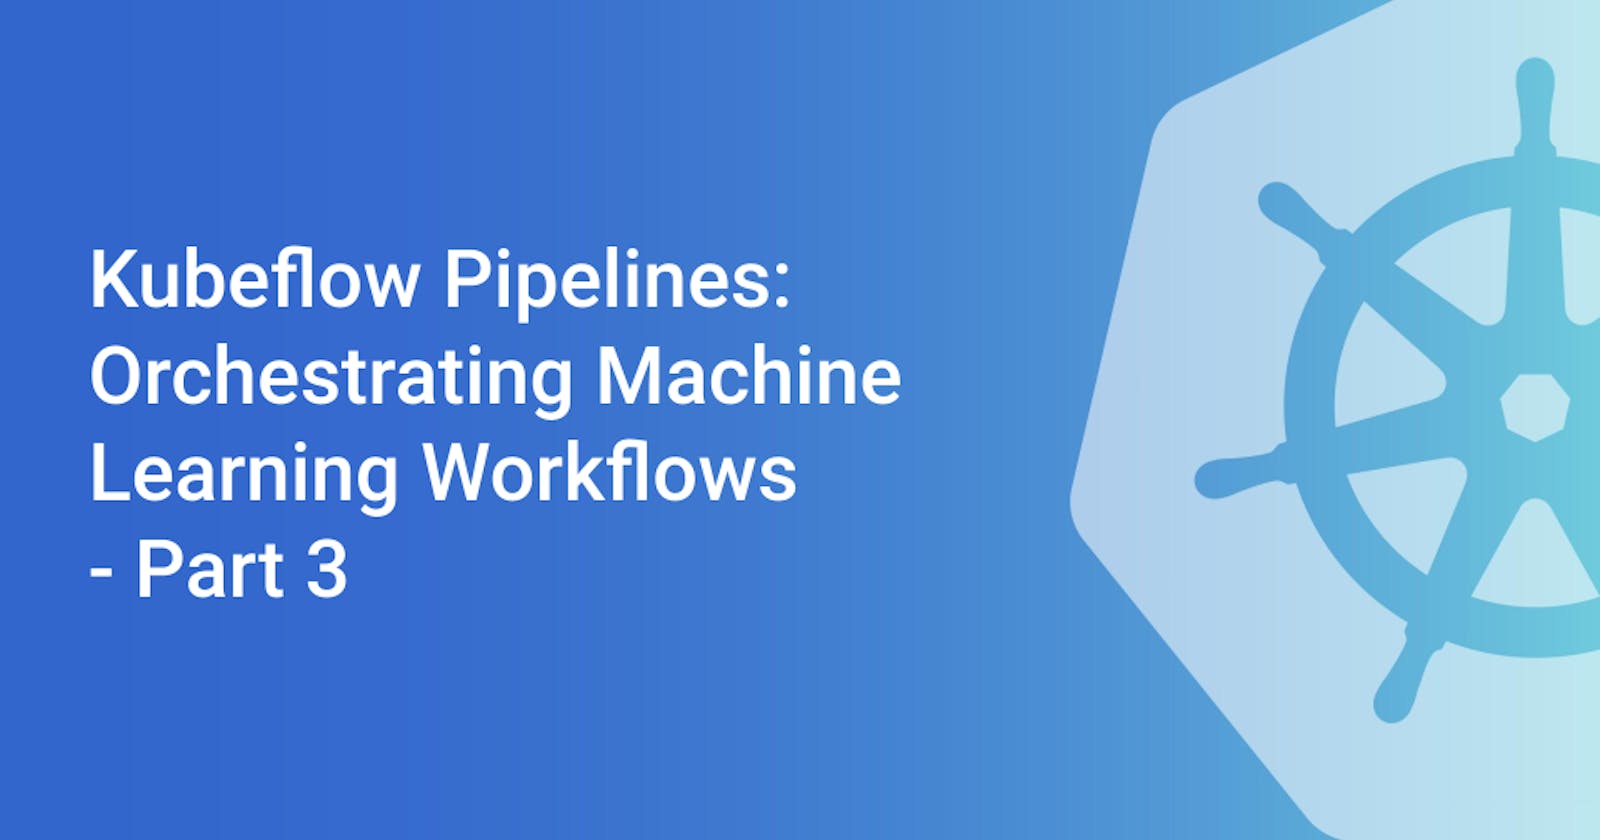 Kubeflow Pipelines: Orchestrating Machine Learning Workflows - Part 3